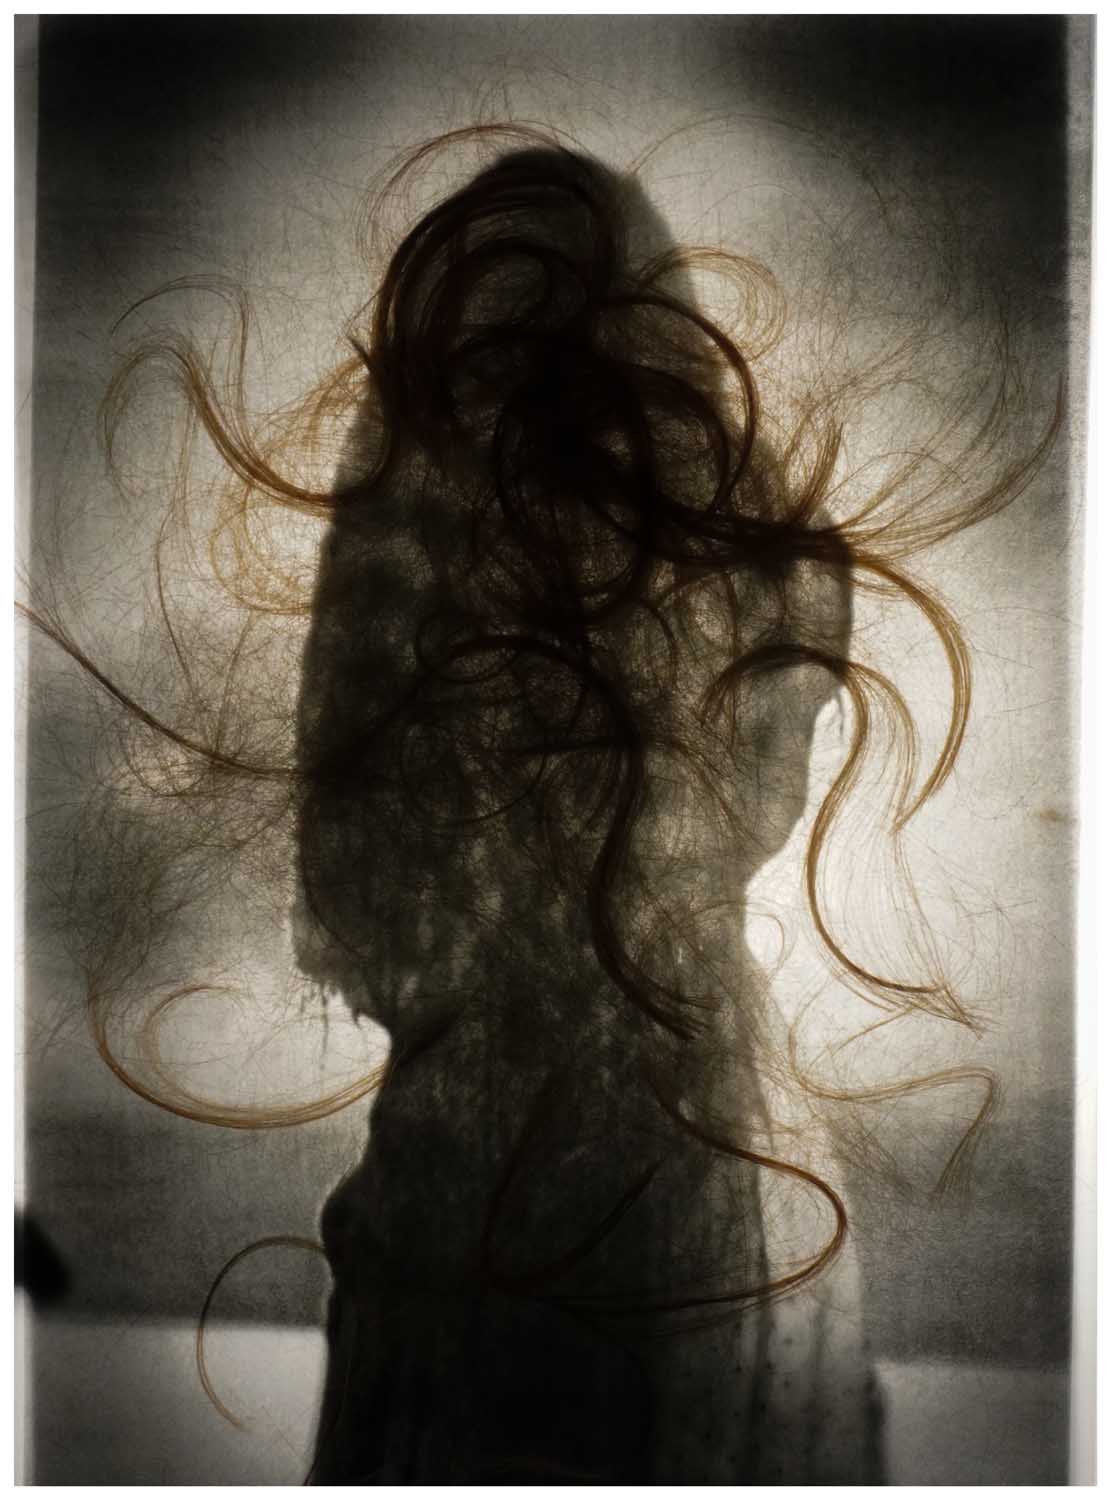 André Werner, Her Hair III a, 2023 Installation based photograph Fine Art print on Arches cotton rag 310, Edition of 5 | 2 AP 40 x 30 cm (print), 50 x 40 cm (framed)